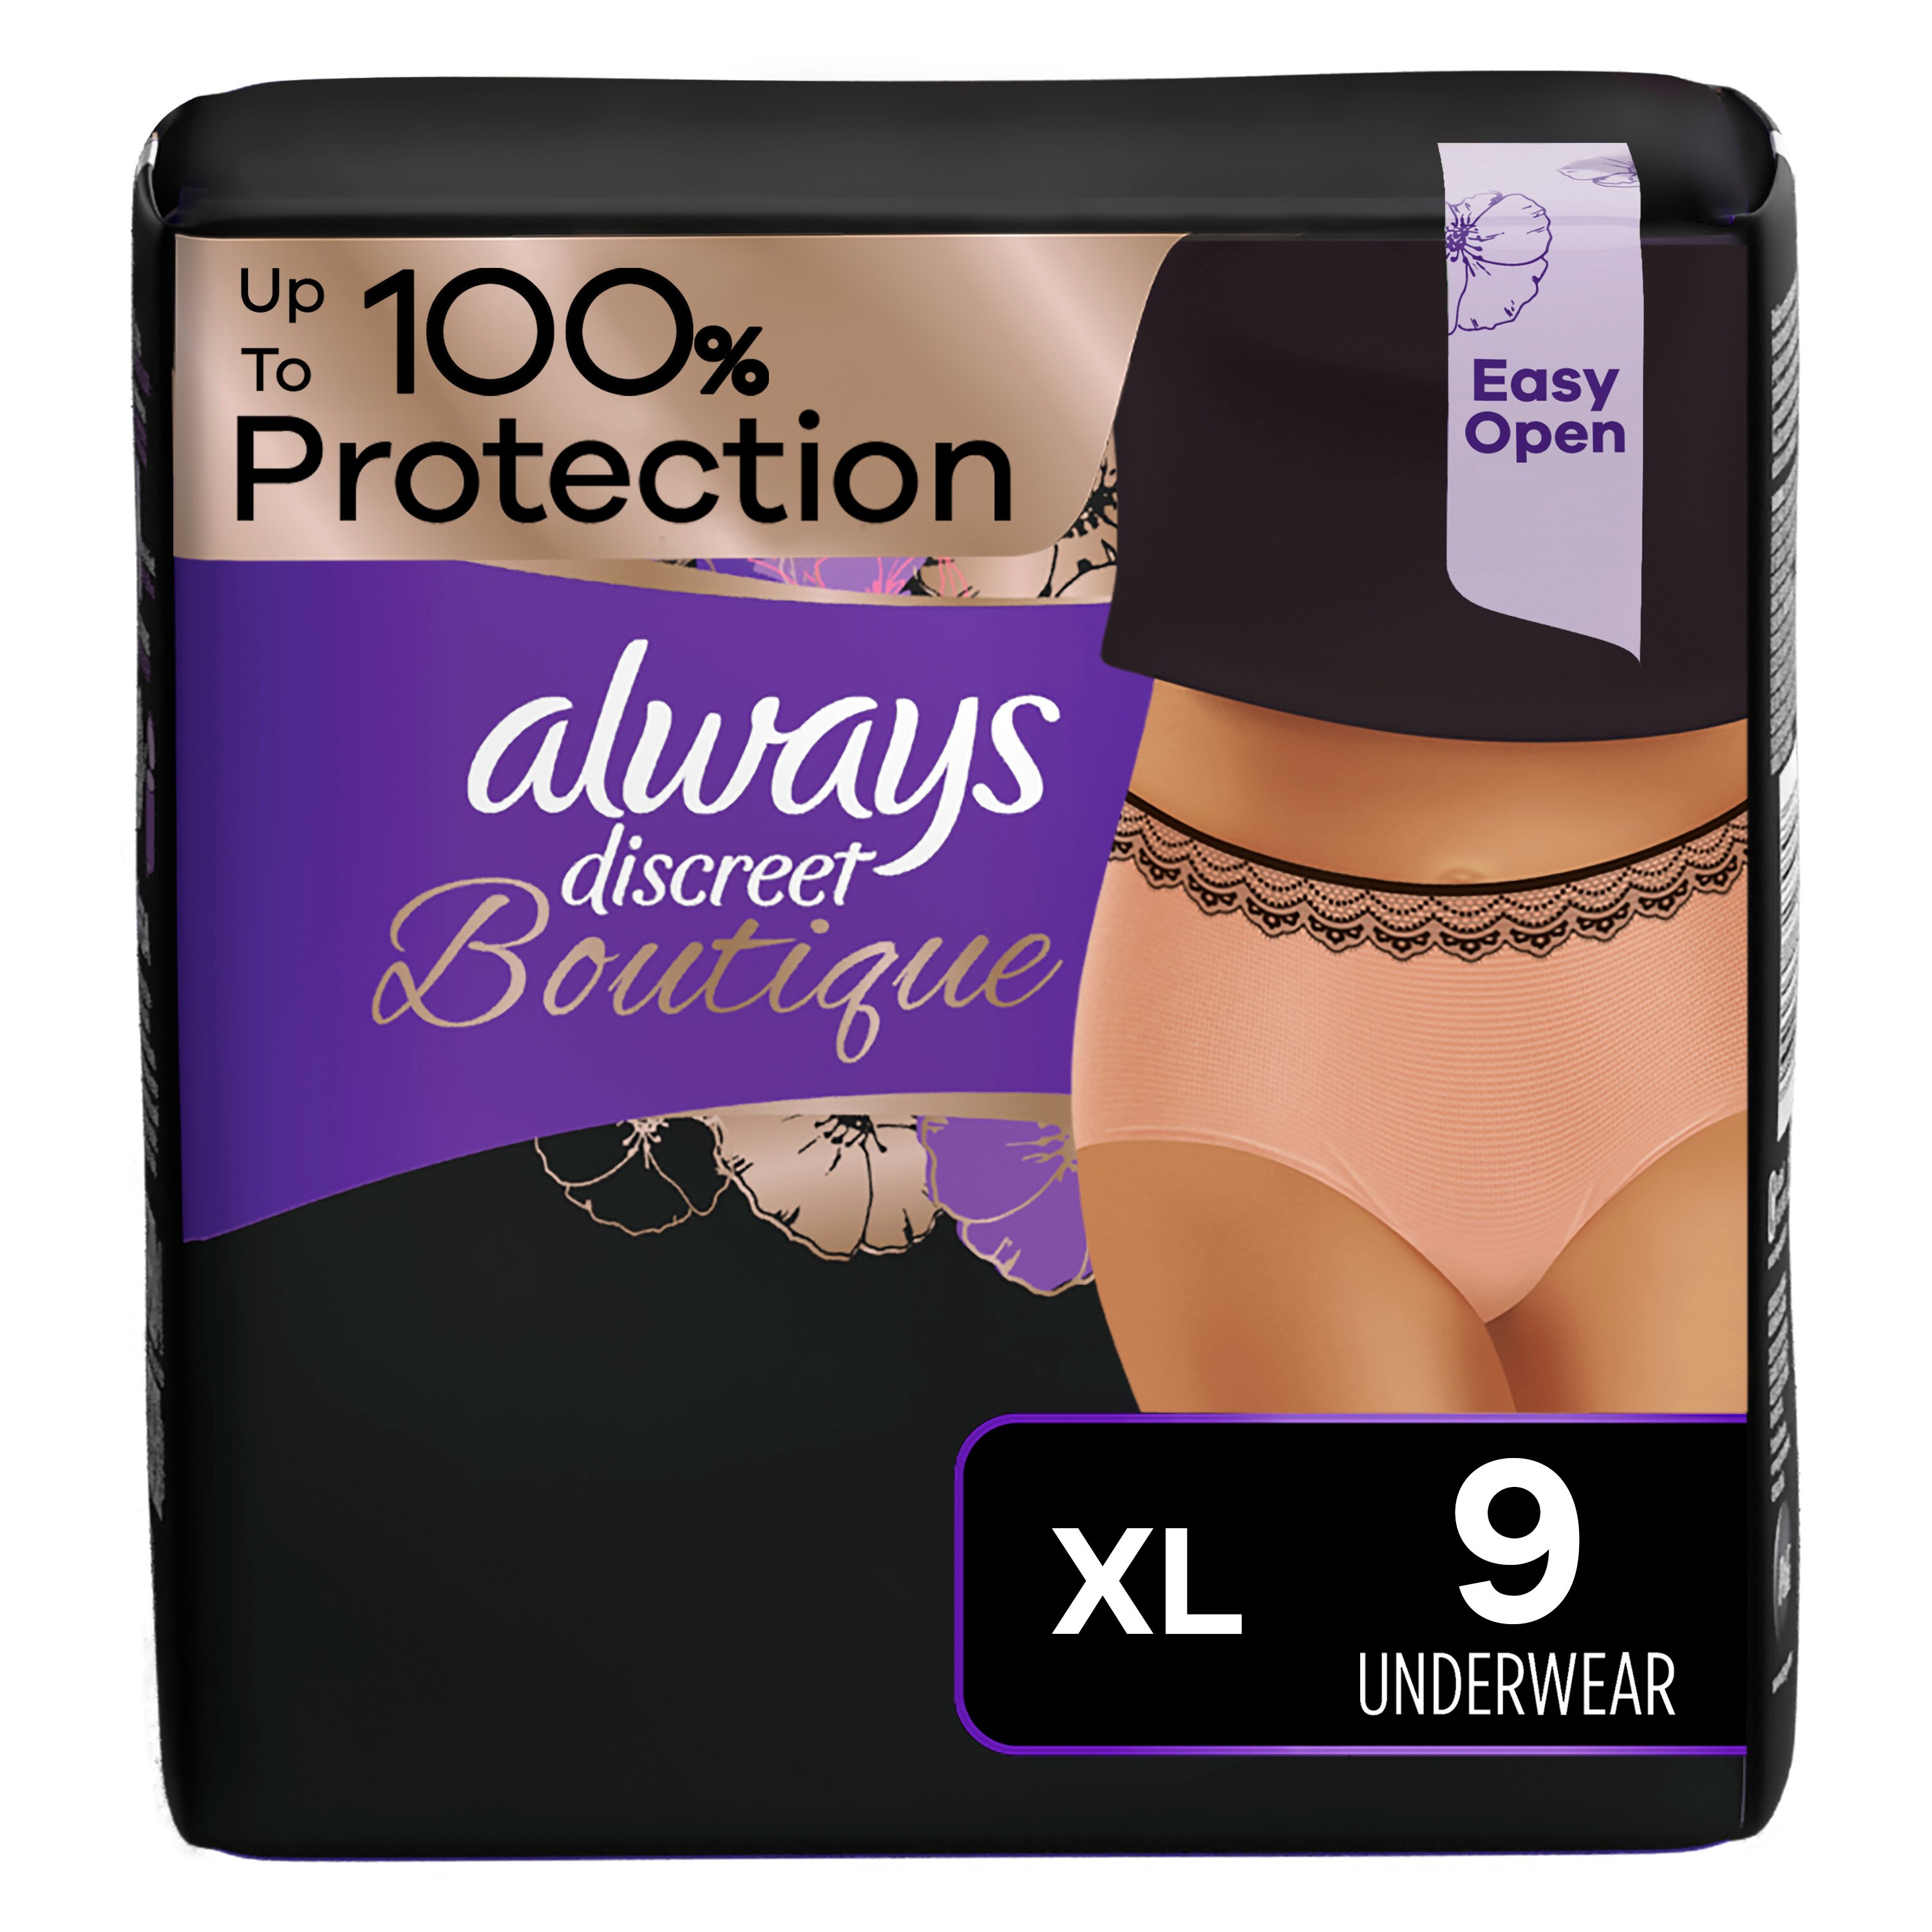 Discreet Always Discreet Boutique, Incontinence Underwear for Women, Maximum Protection, Peach, XL, 9 CT